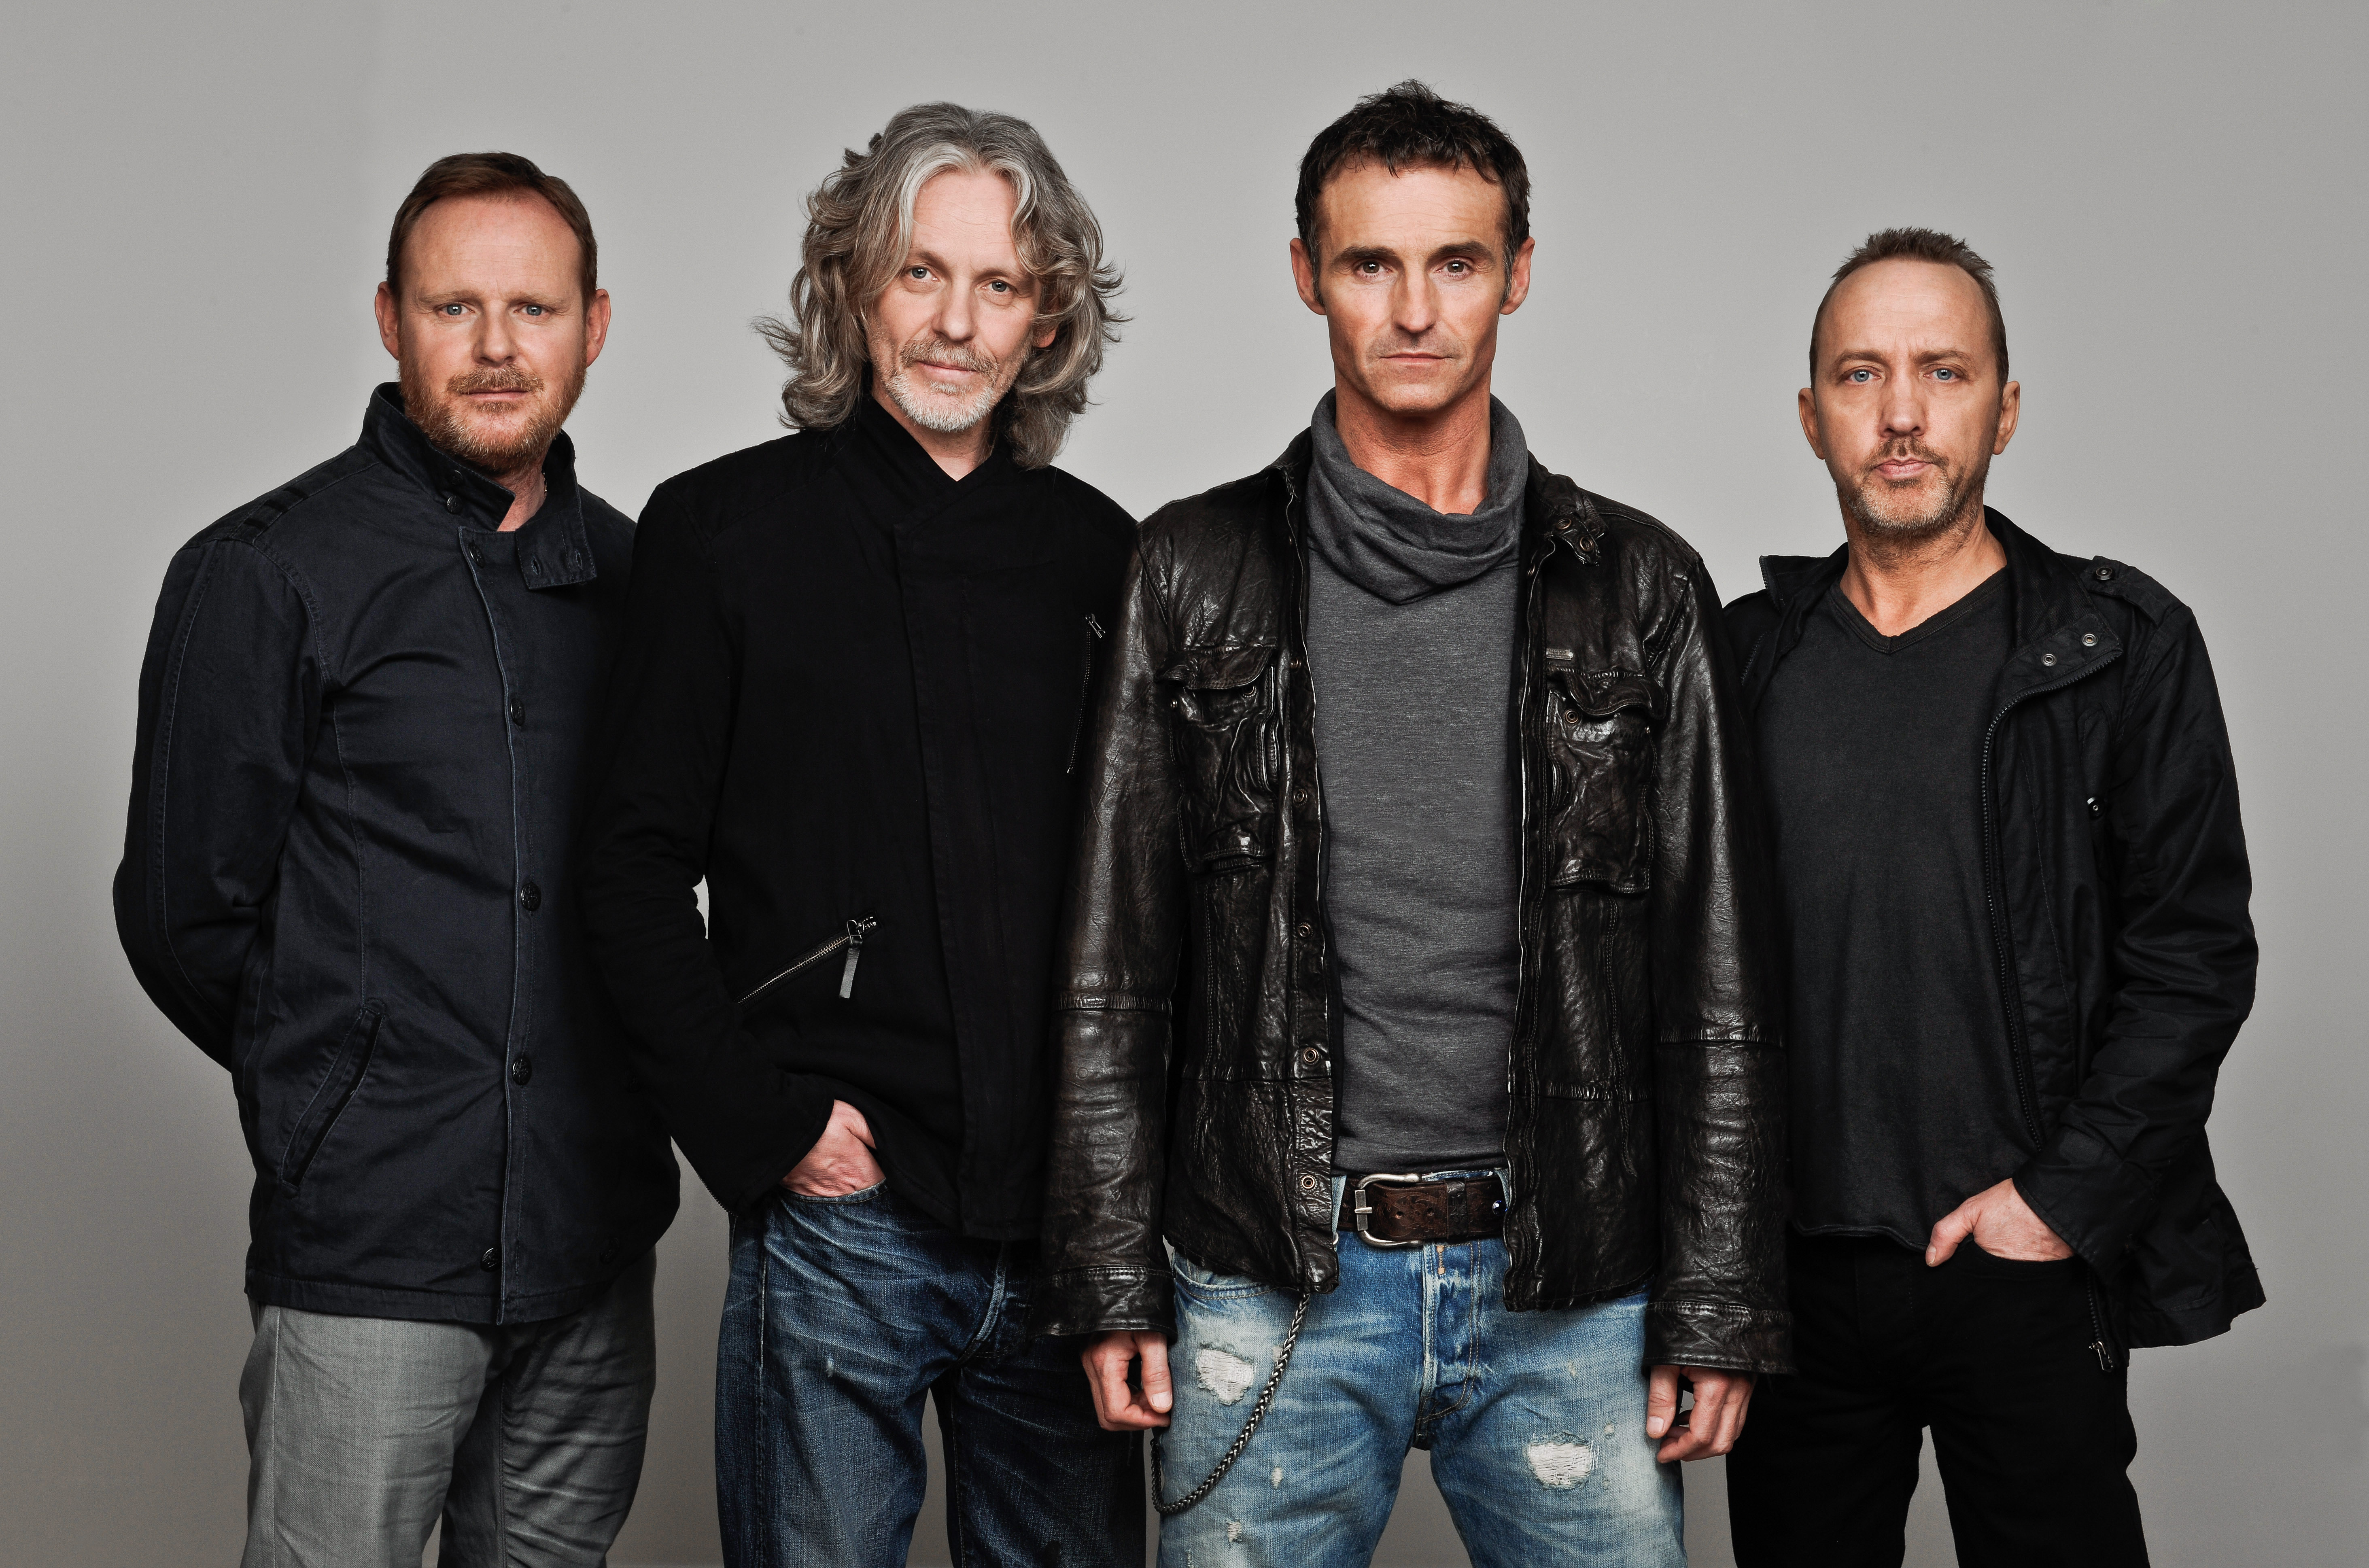 Former frontman Marti Pellow left the group in 2017